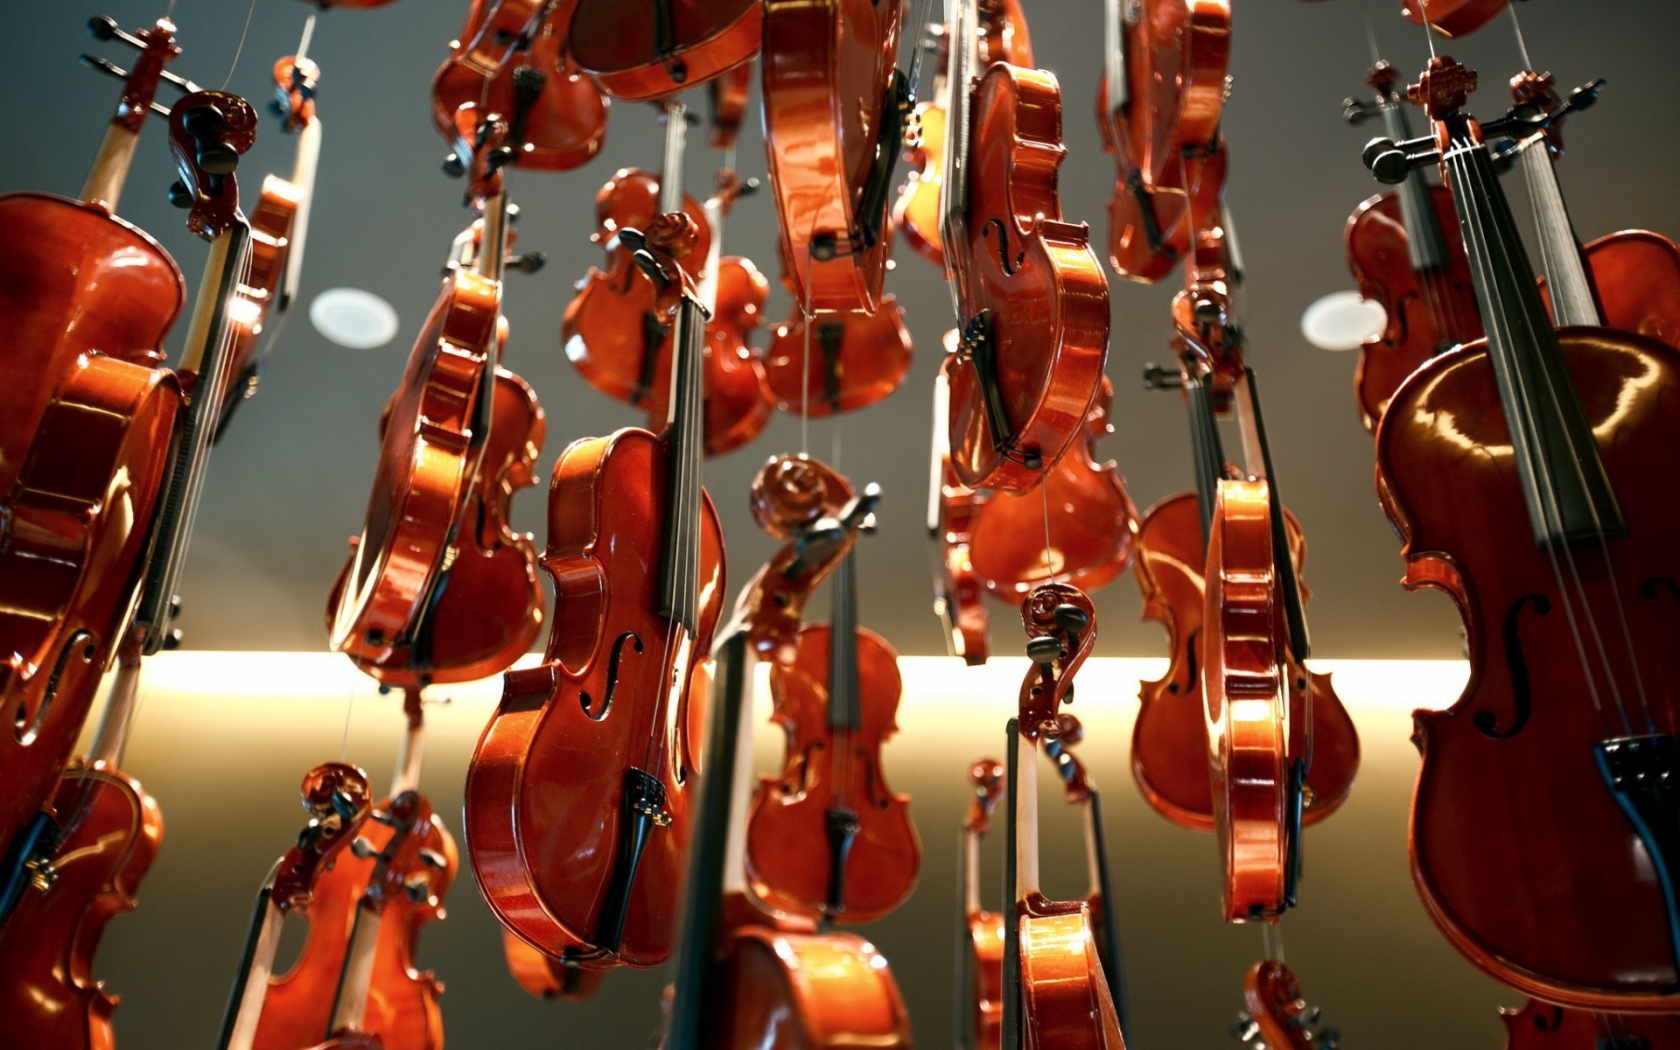 New Violins for 1680 x 1050 widescreen resolution